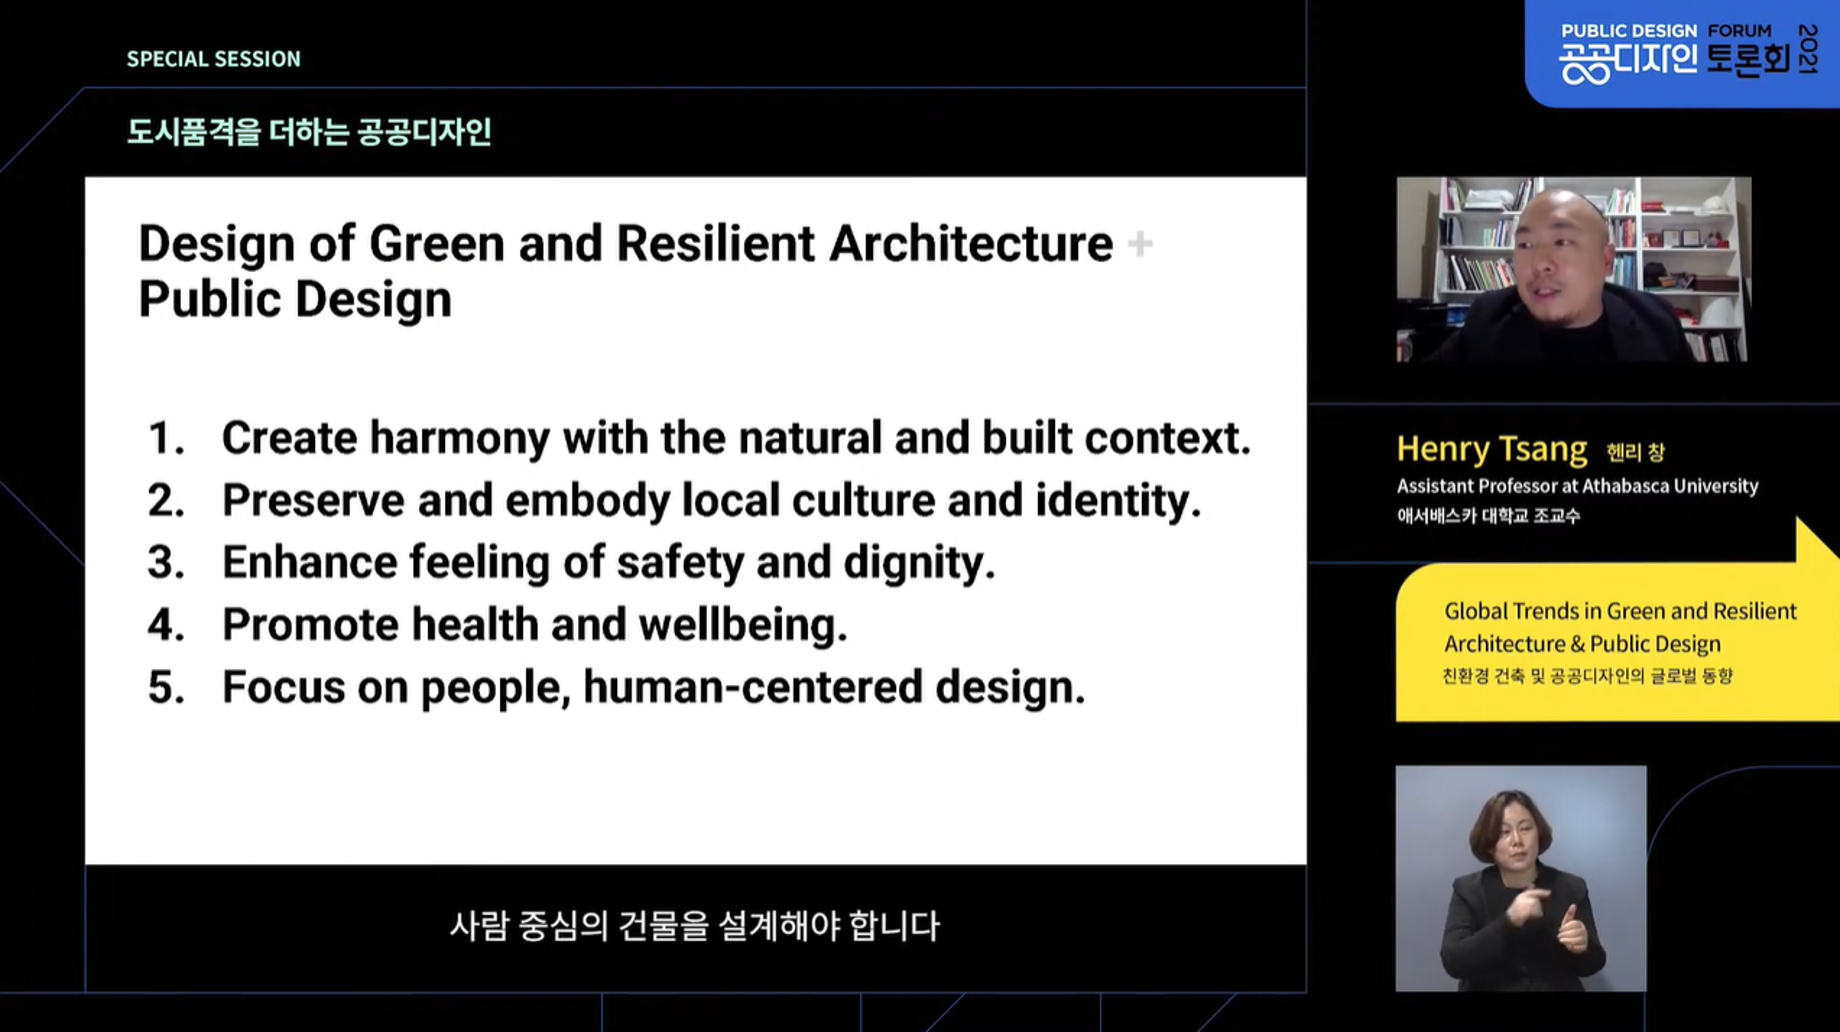 SPECIAL SESSION 2021공공디자인 토론회(2021 PUBLIC DESIGN FORUM) 도시품격을 더하는 공공디자인 [Design of Green and Resilient Architecture Public Design]
        1. Create harmony with the natural and built context.
        2. Preserve and embody local culture and identity.
        3. Enhance feeling of safety and dignity.
        4. Promote health and wellbeing.
        5. Focus on people, human-centered design.
        사람 중심의 건물을 설계해야 합니다
        Henry Tsang 헨리 창(Assistant Professor at Athabasca University, 애서배스카 대학교 조교수) Global Trends in Green and Resilient Architecture & Public Design(친환경 건축 및 공공디자인의 글로벌 동향)